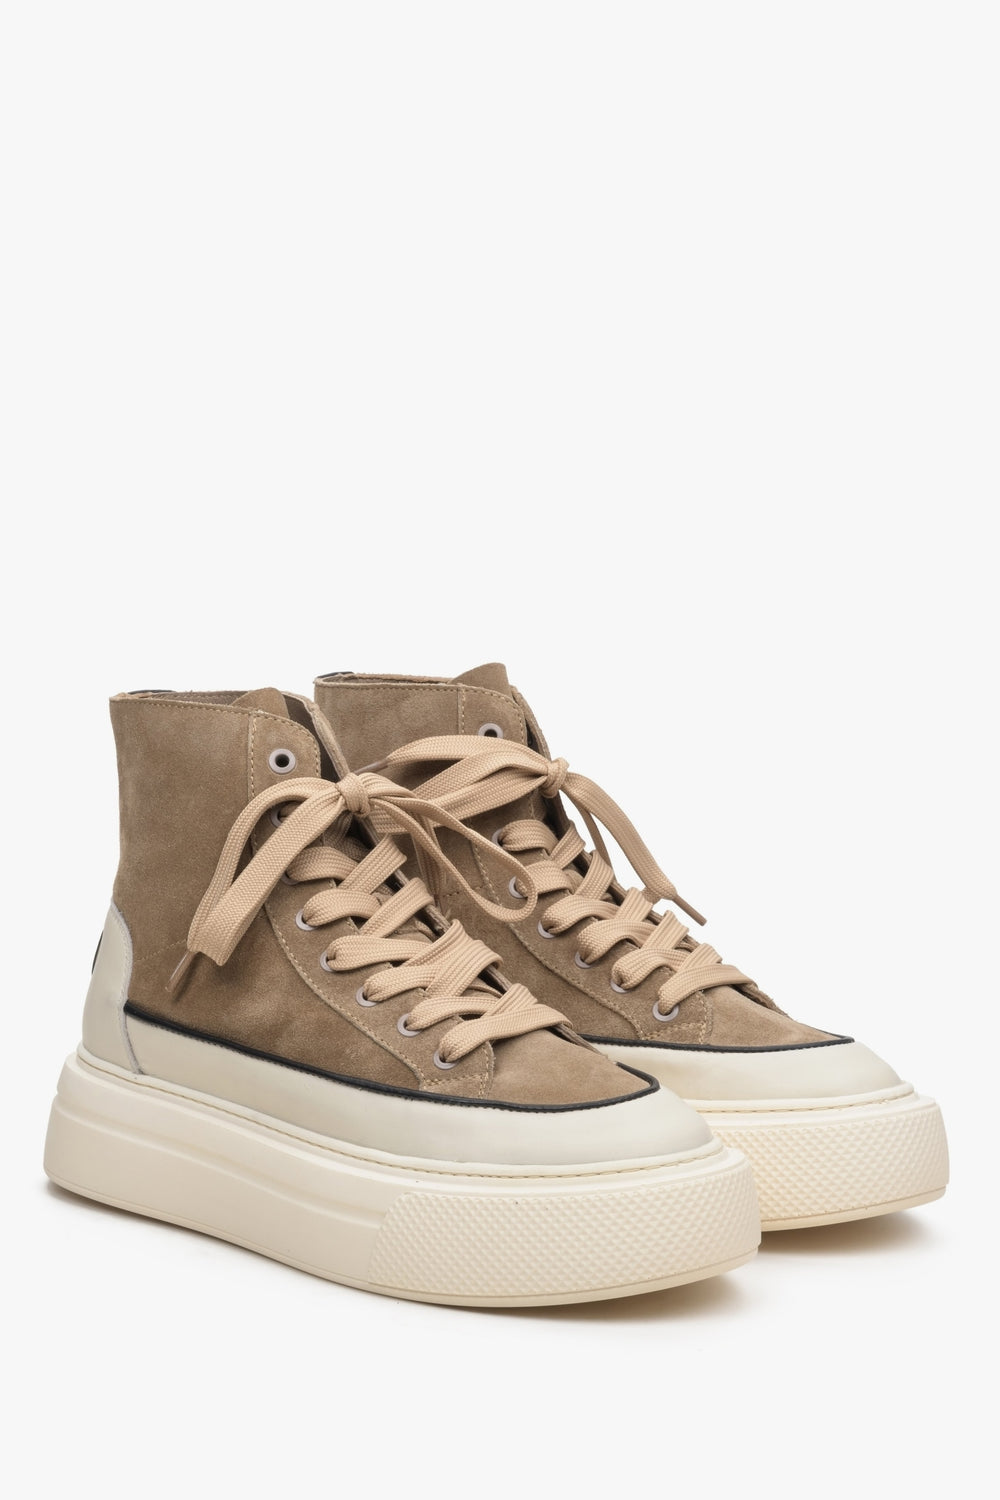 Women's brown-beige high-top sneakers, leather and velour - perfect for fall.